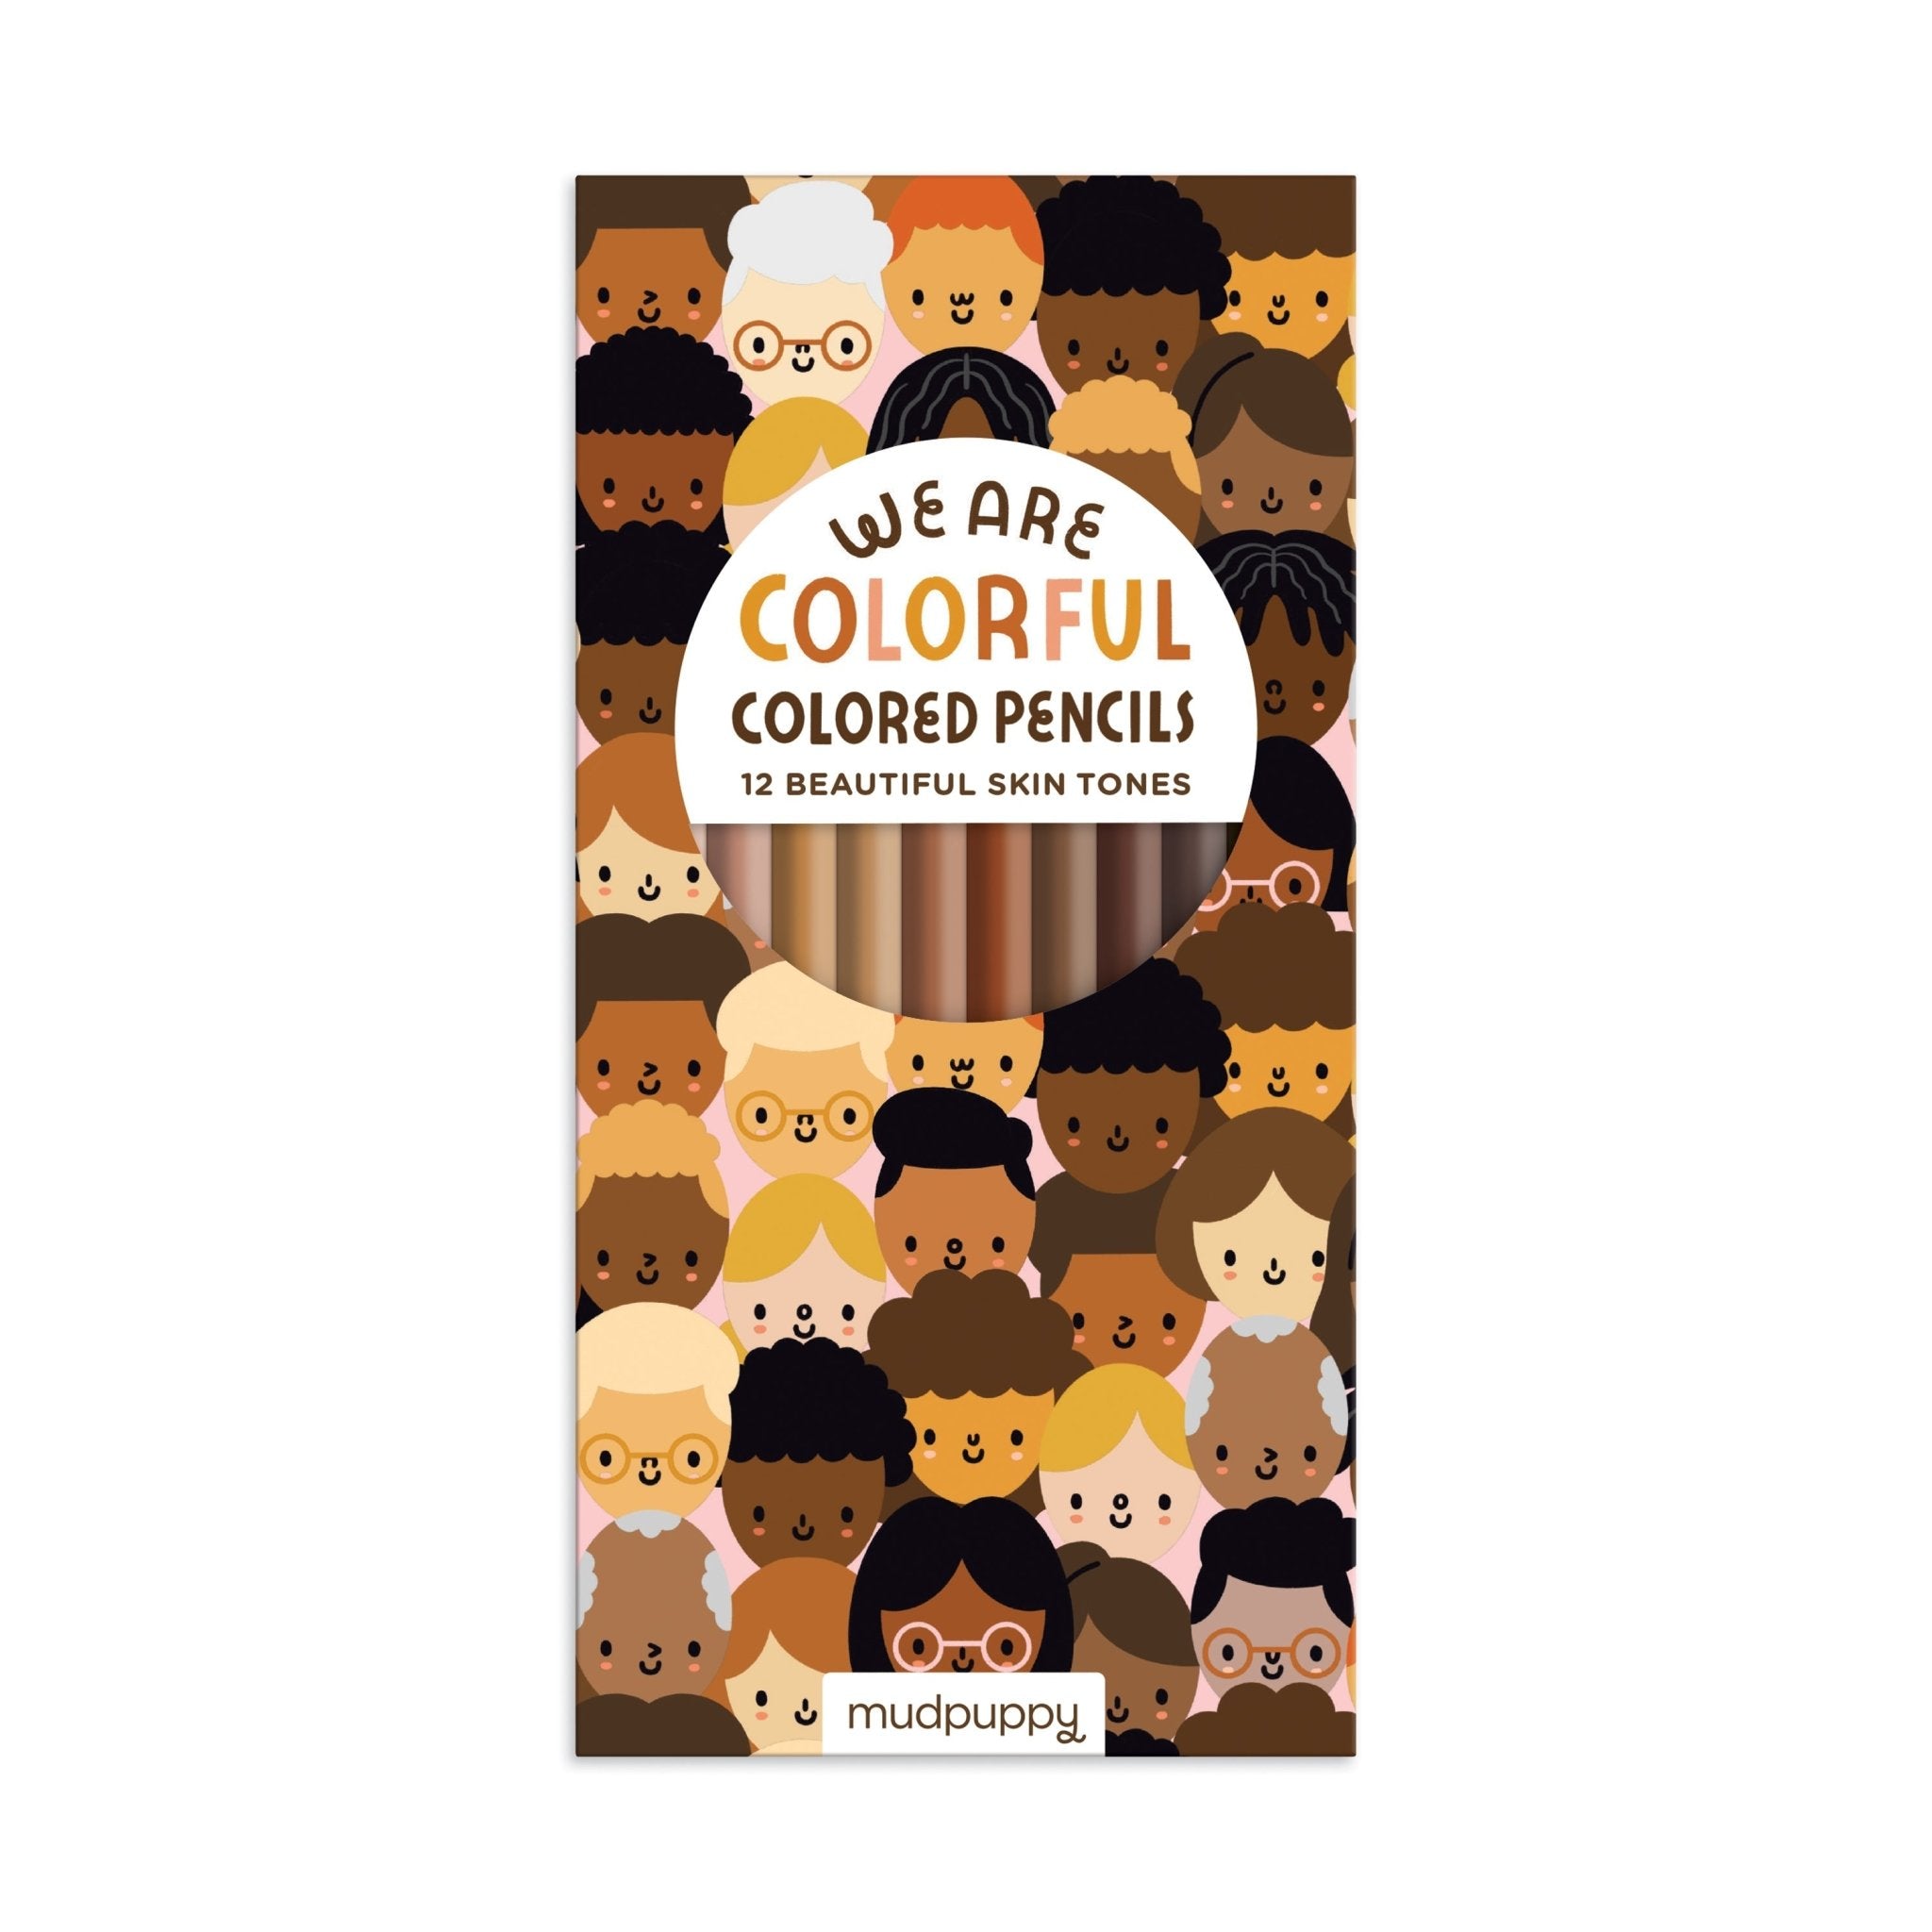 We Are Colorful: Skin Tone Colored Pencils